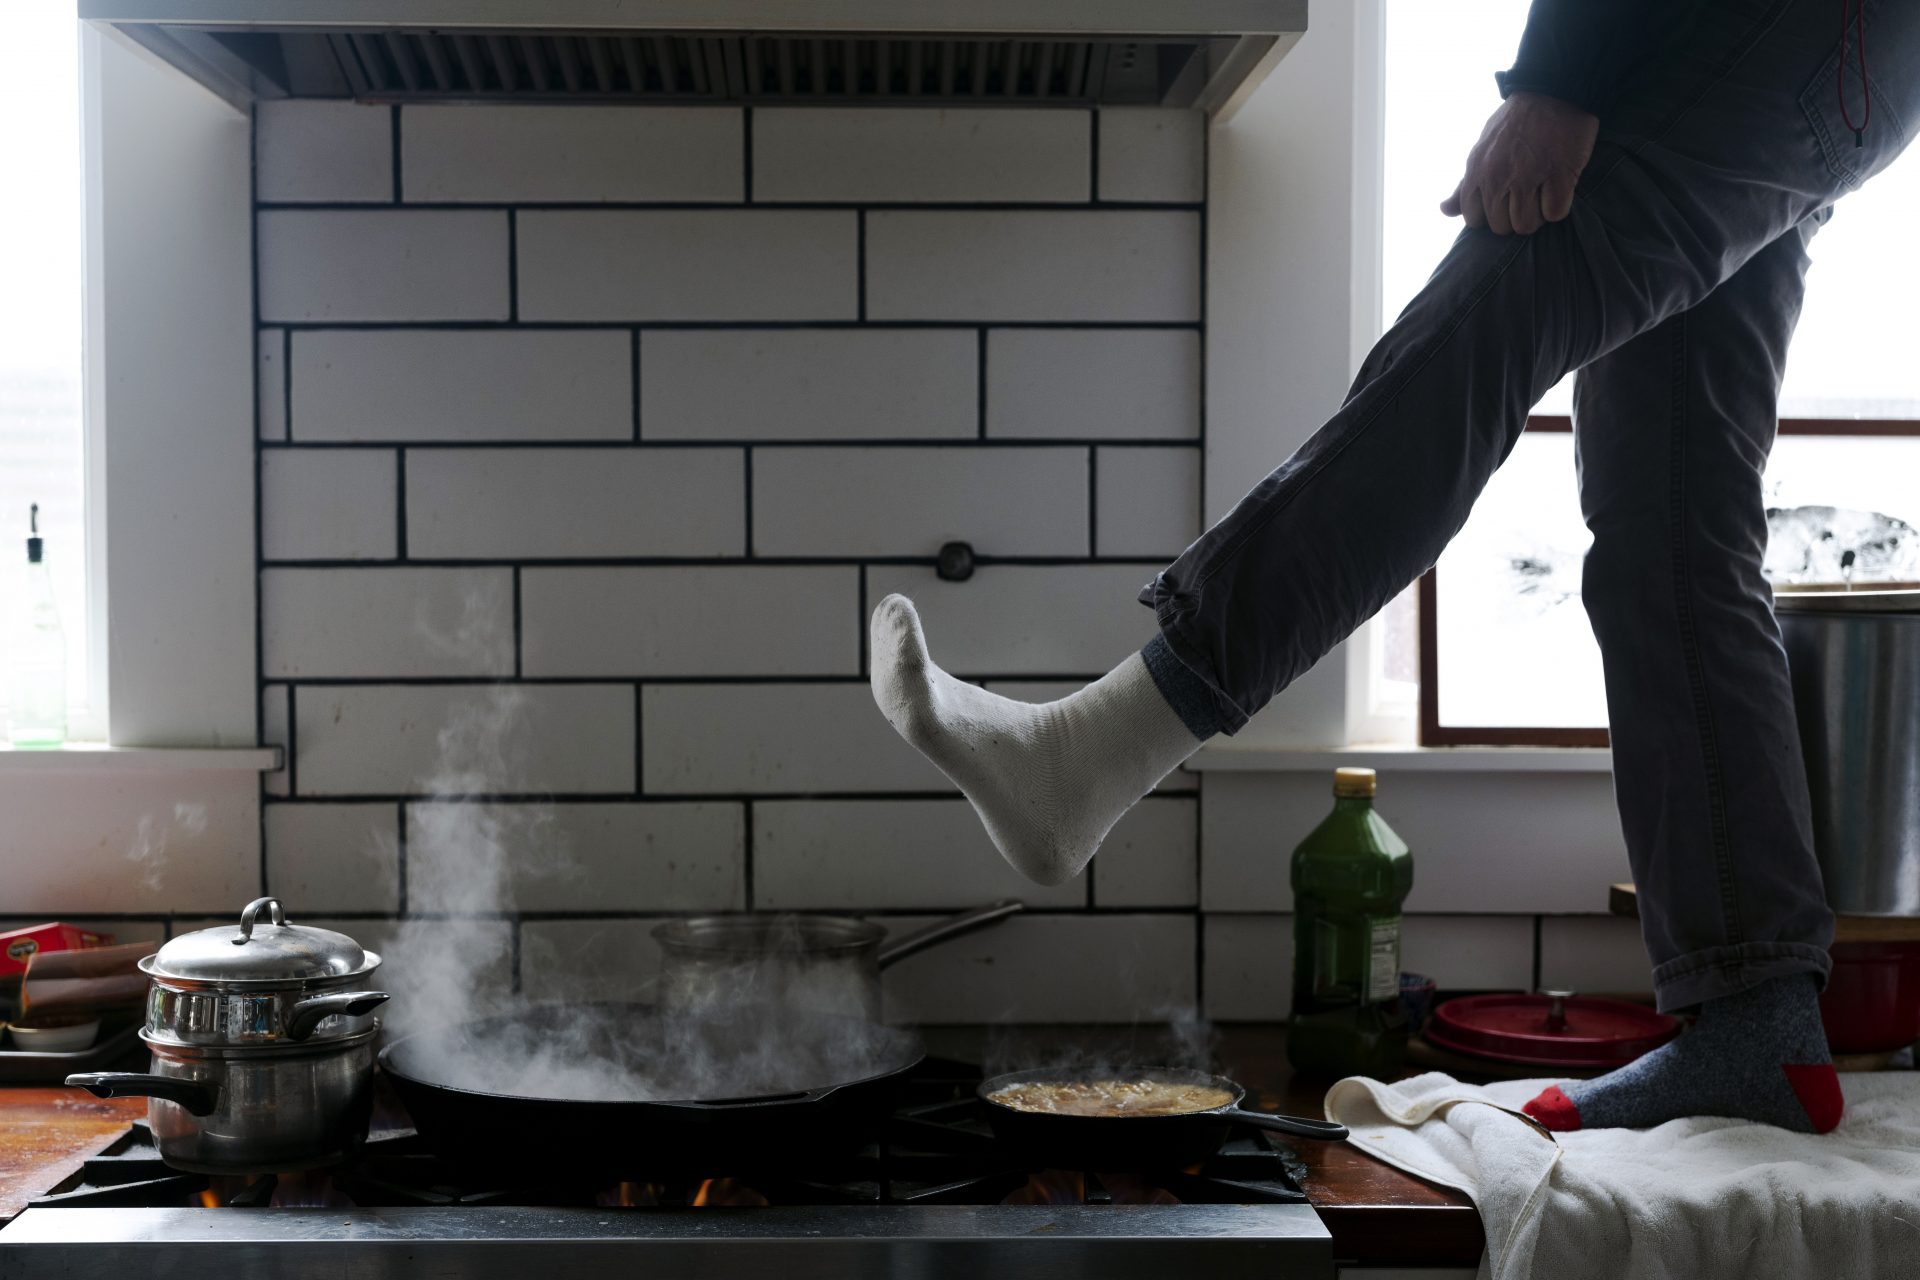 Jorge Sanhueza-Lyon stands on his kitchen counter to warm his feet over his gas stove Tuesday, Feb. 16, 2021, in Austin, Texas. Power was out for thousands of central Texas residents after temperatures dropped into the single digits when a snow storm hit the area on Sunday night.